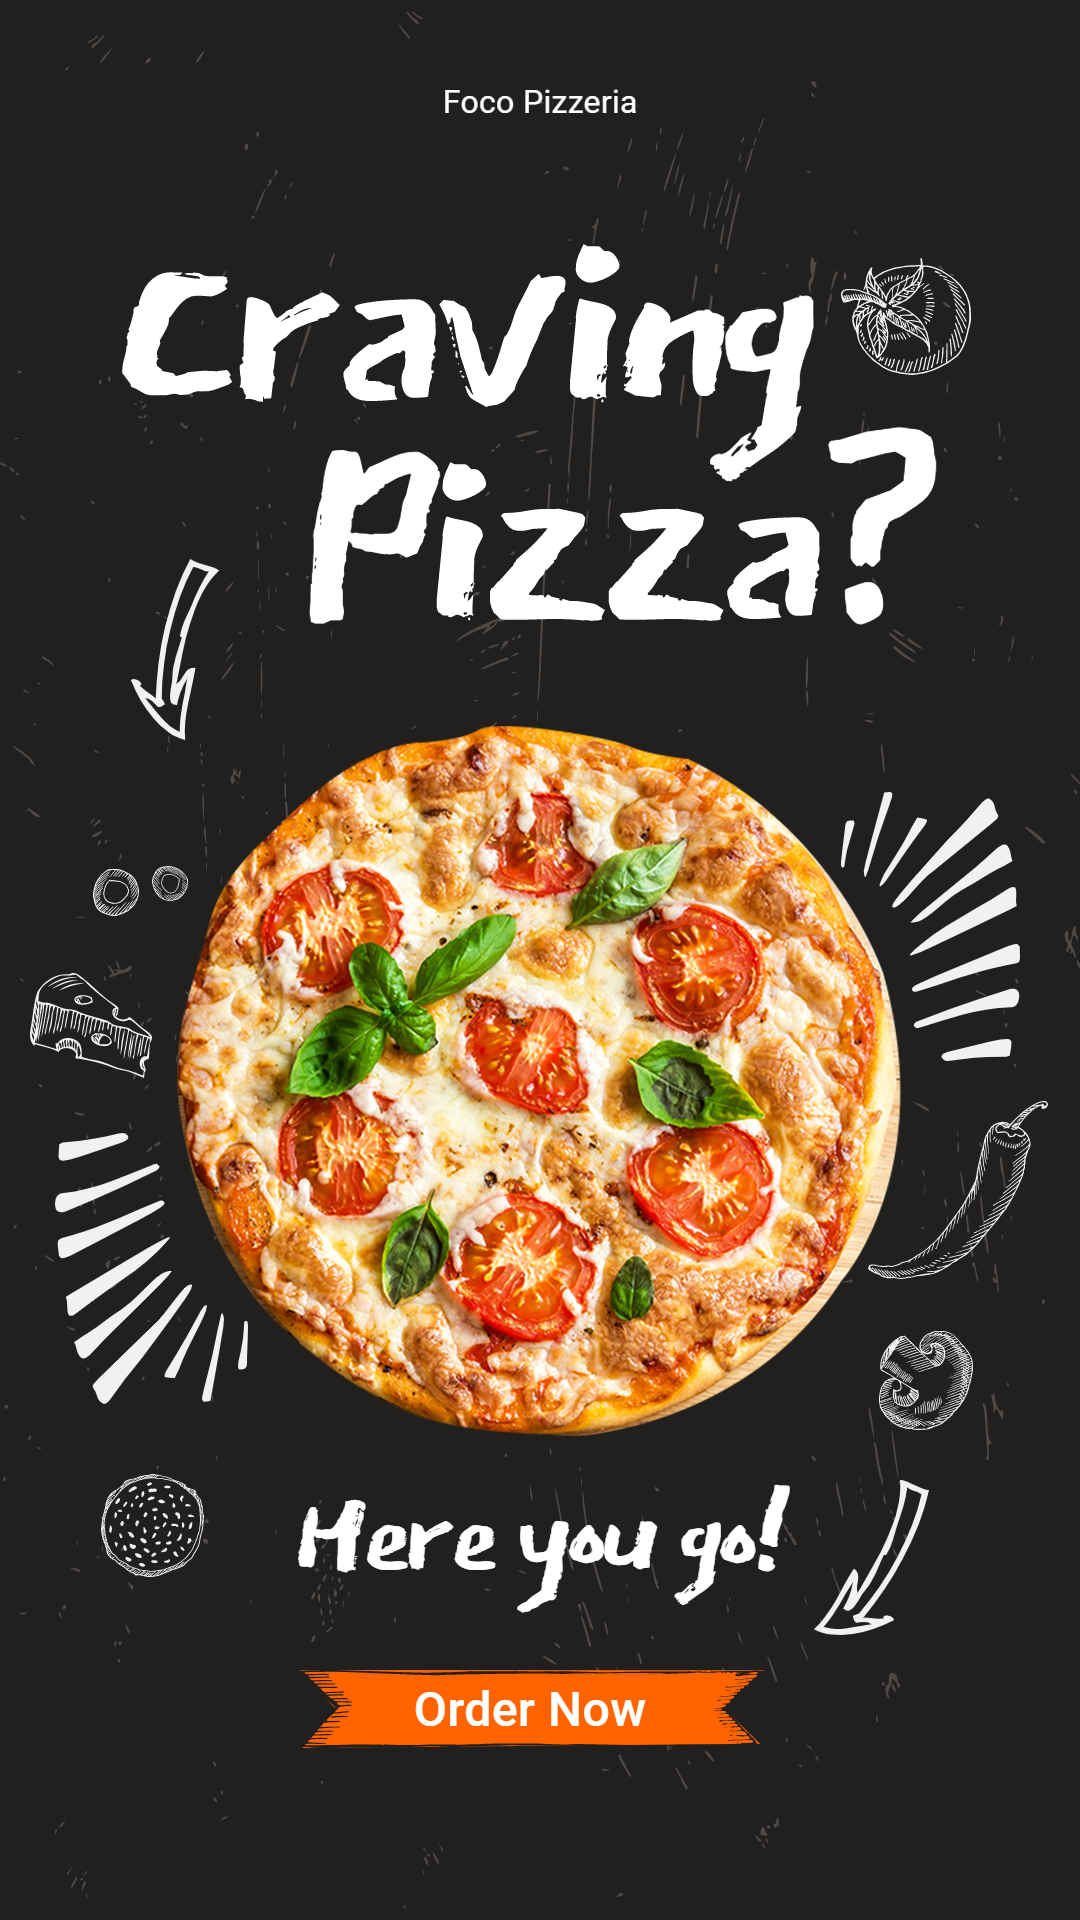 Creative Pizza Display Promotion Ecommerce Story